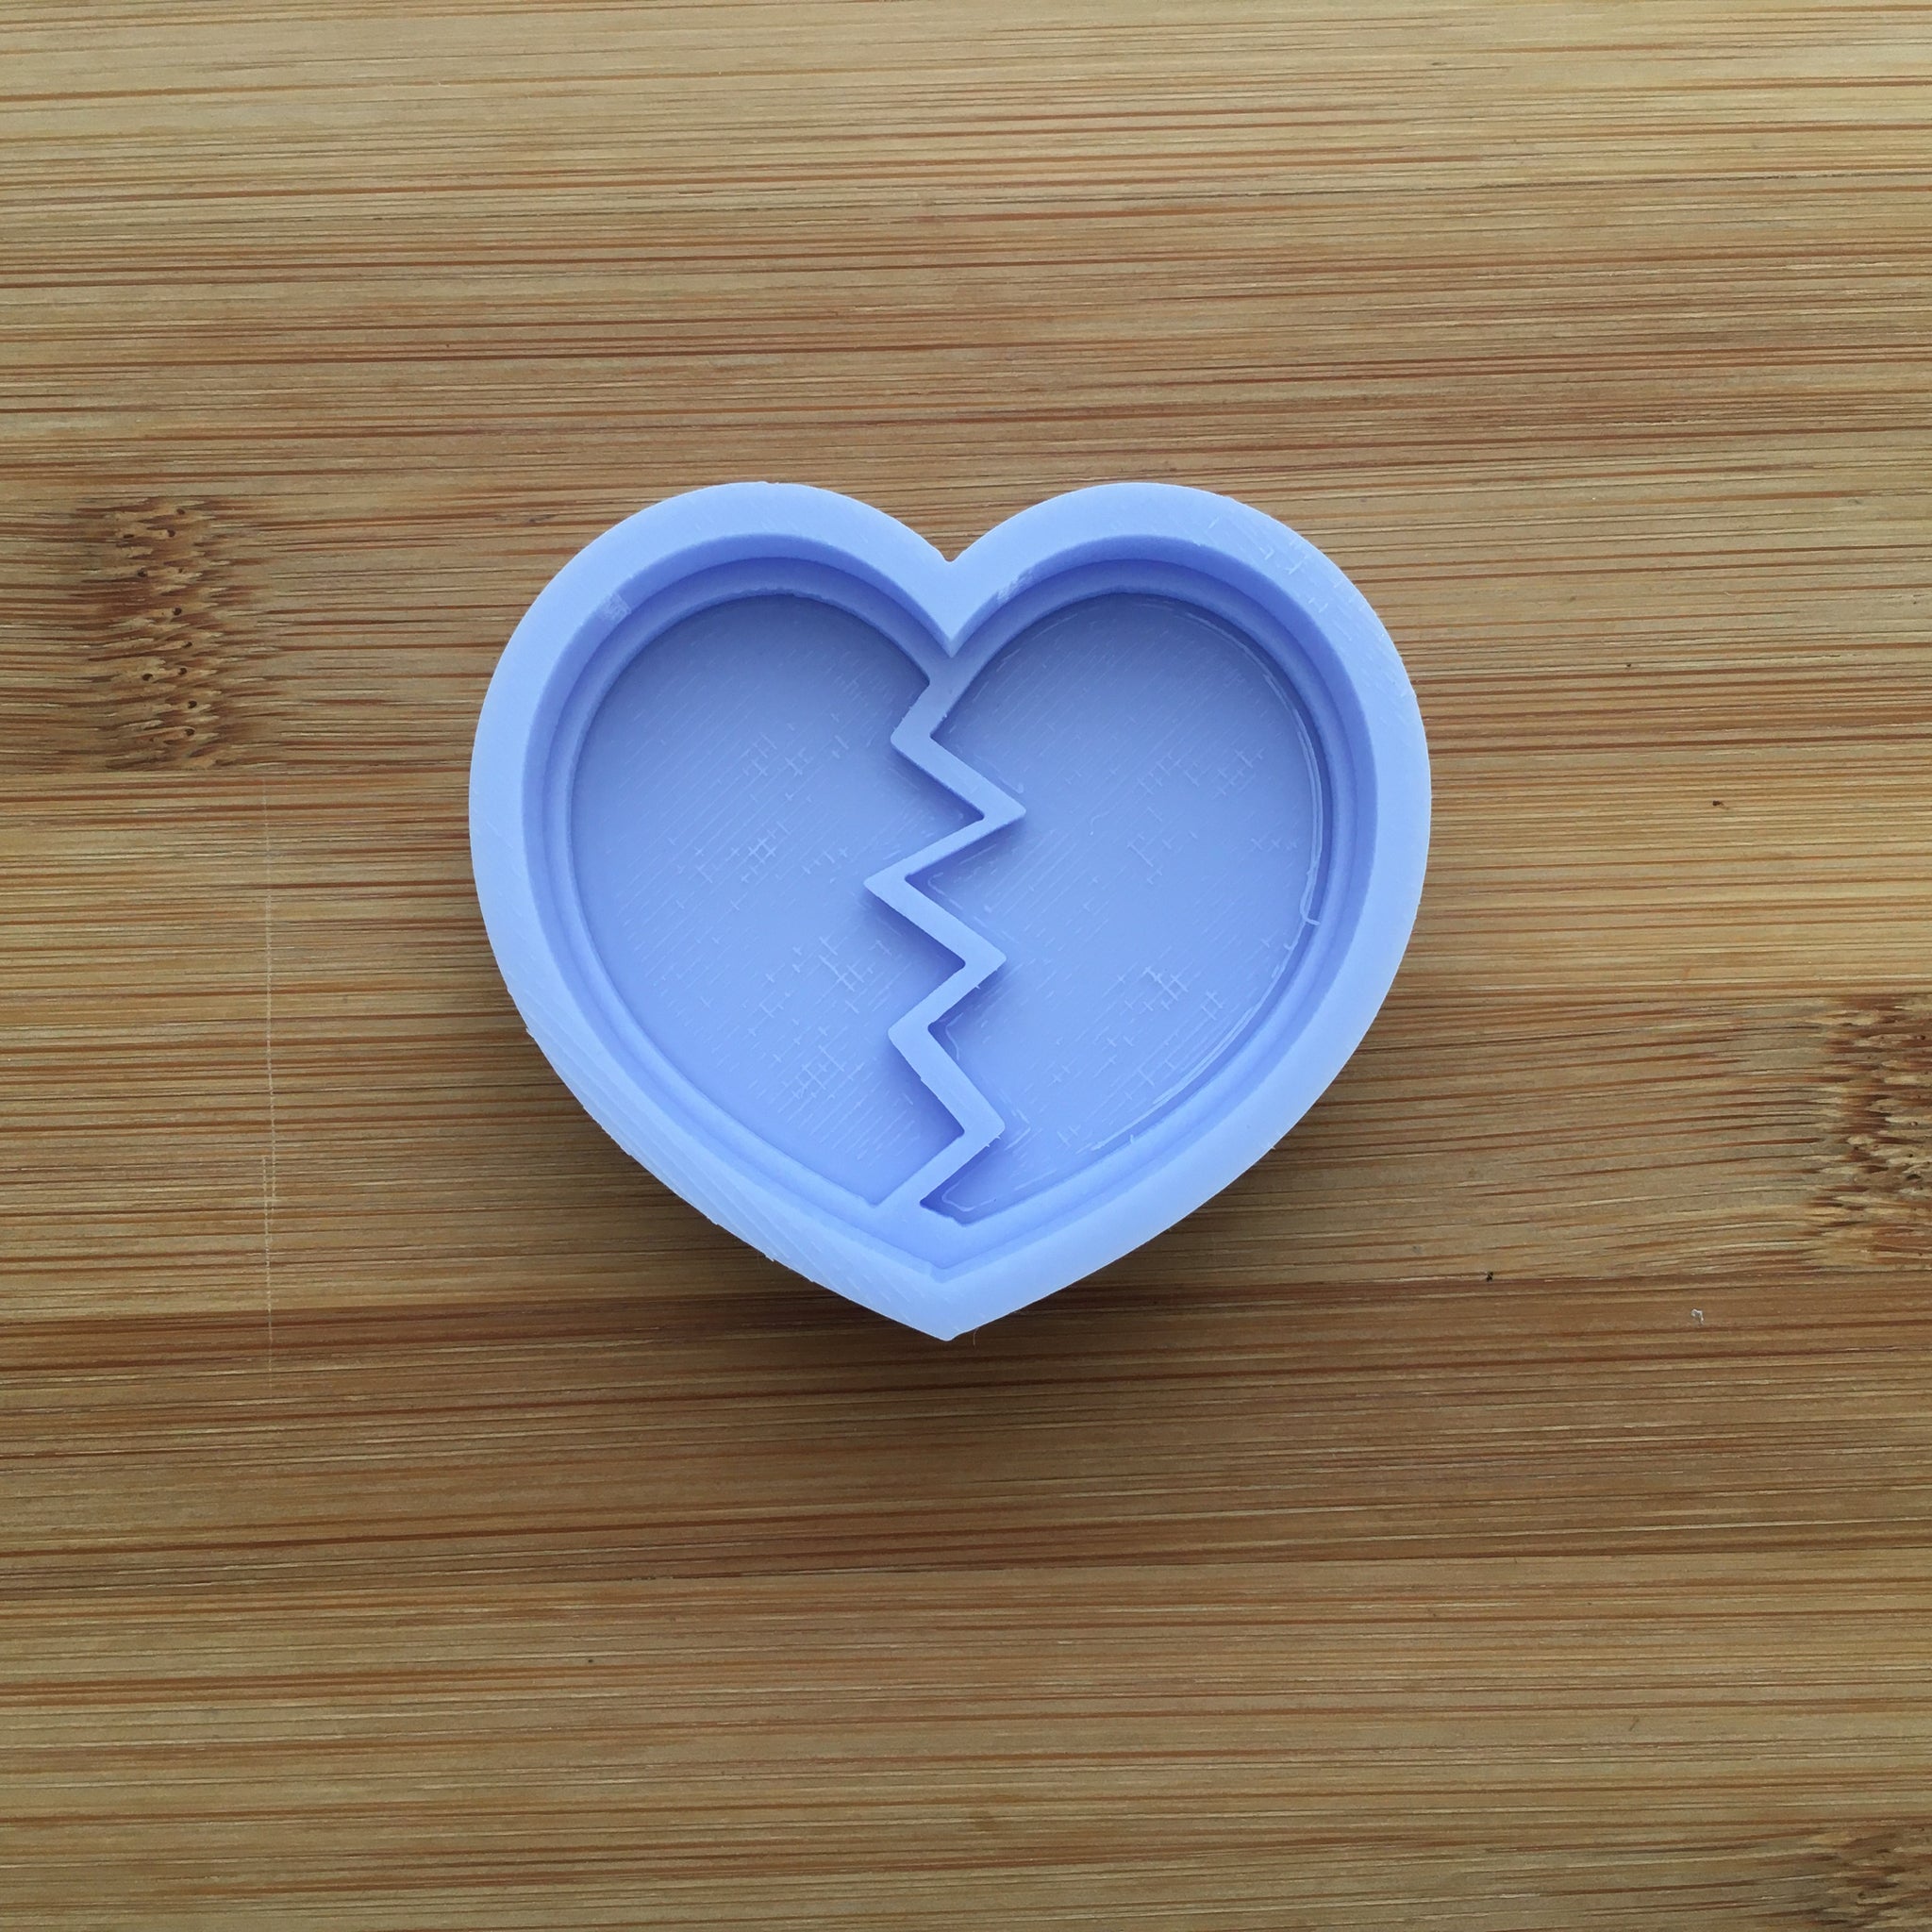 Heart Resin Shaker Mold Silicone  Epoxy Resin Silicone Mold Heart